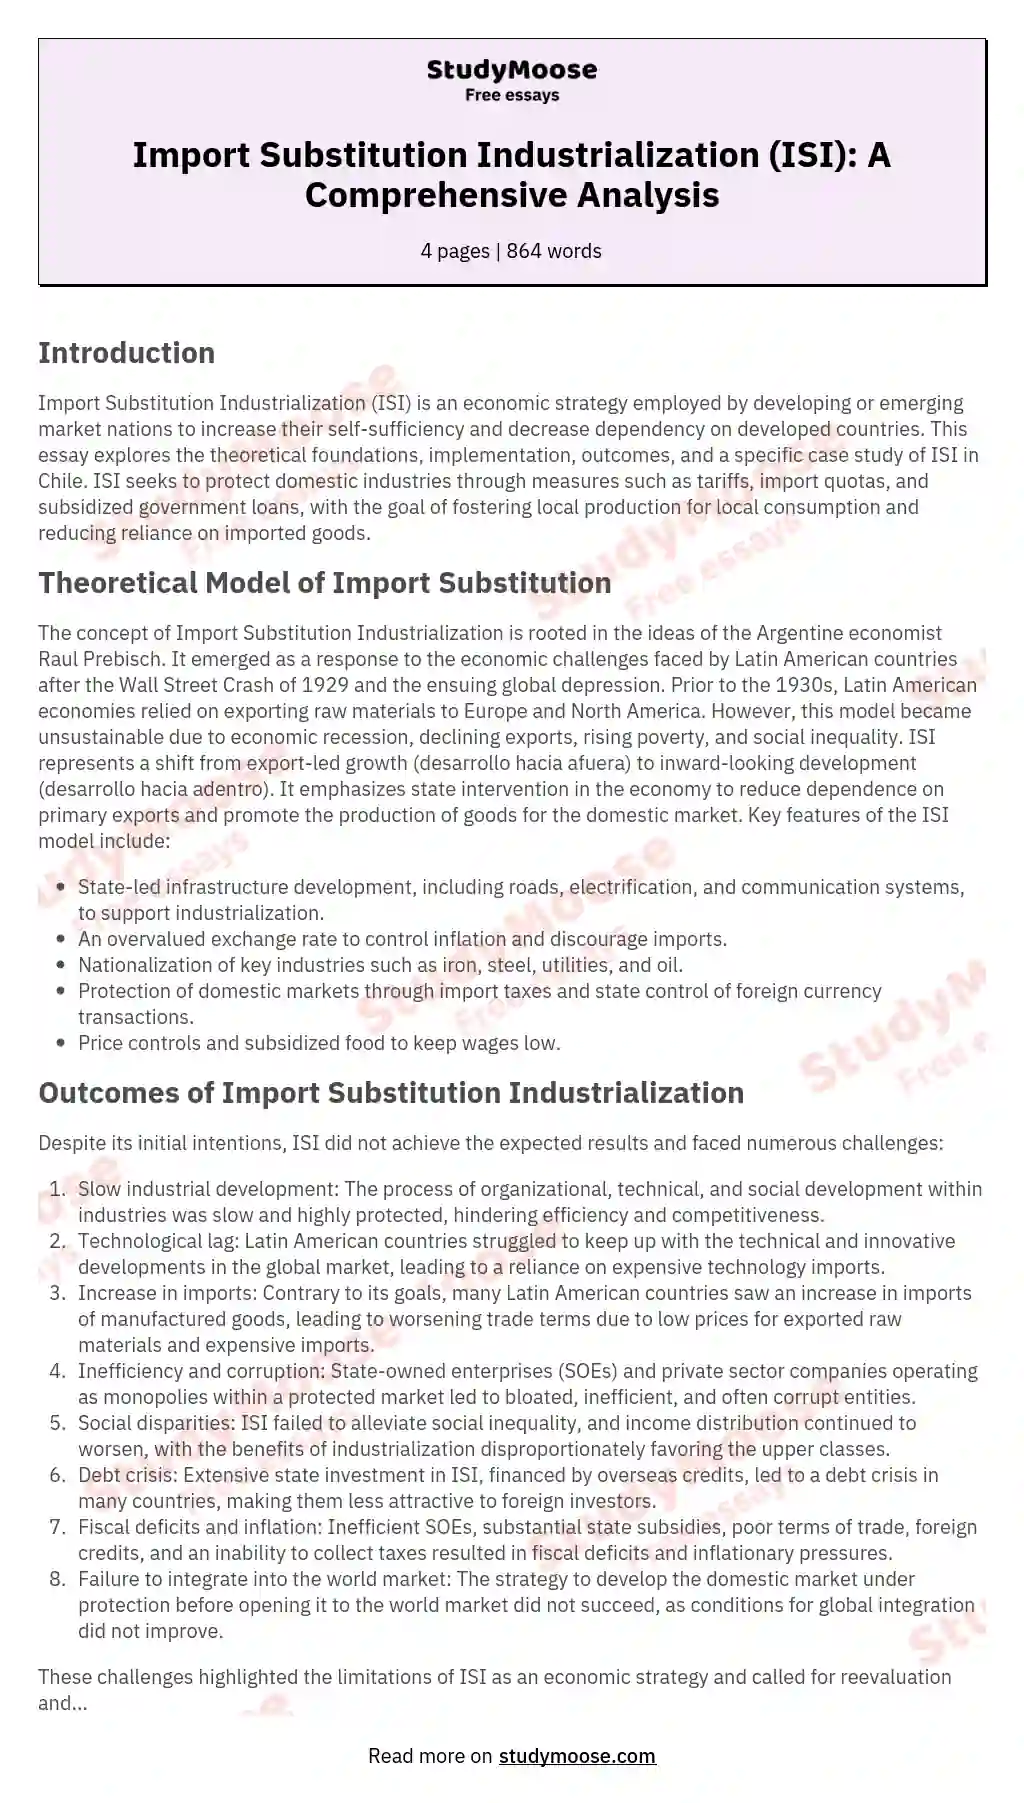 Import Substitution Industrialization (ISI): A Comprehensive Analysis essay